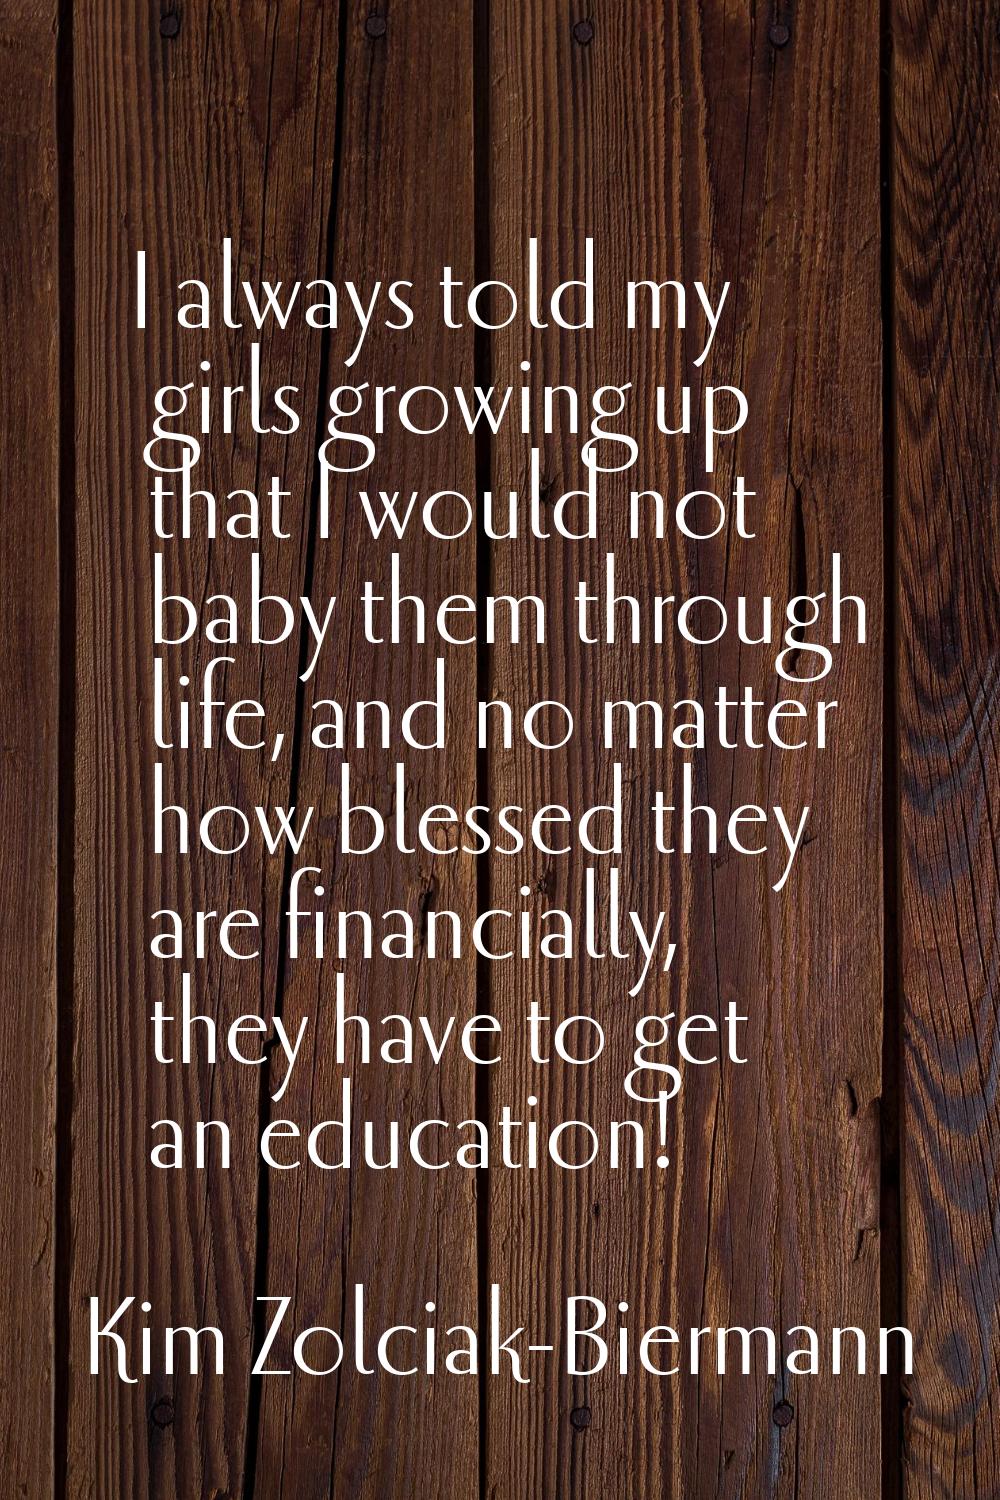 I always told my girls growing up that I would not baby them through life, and no matter how blesse